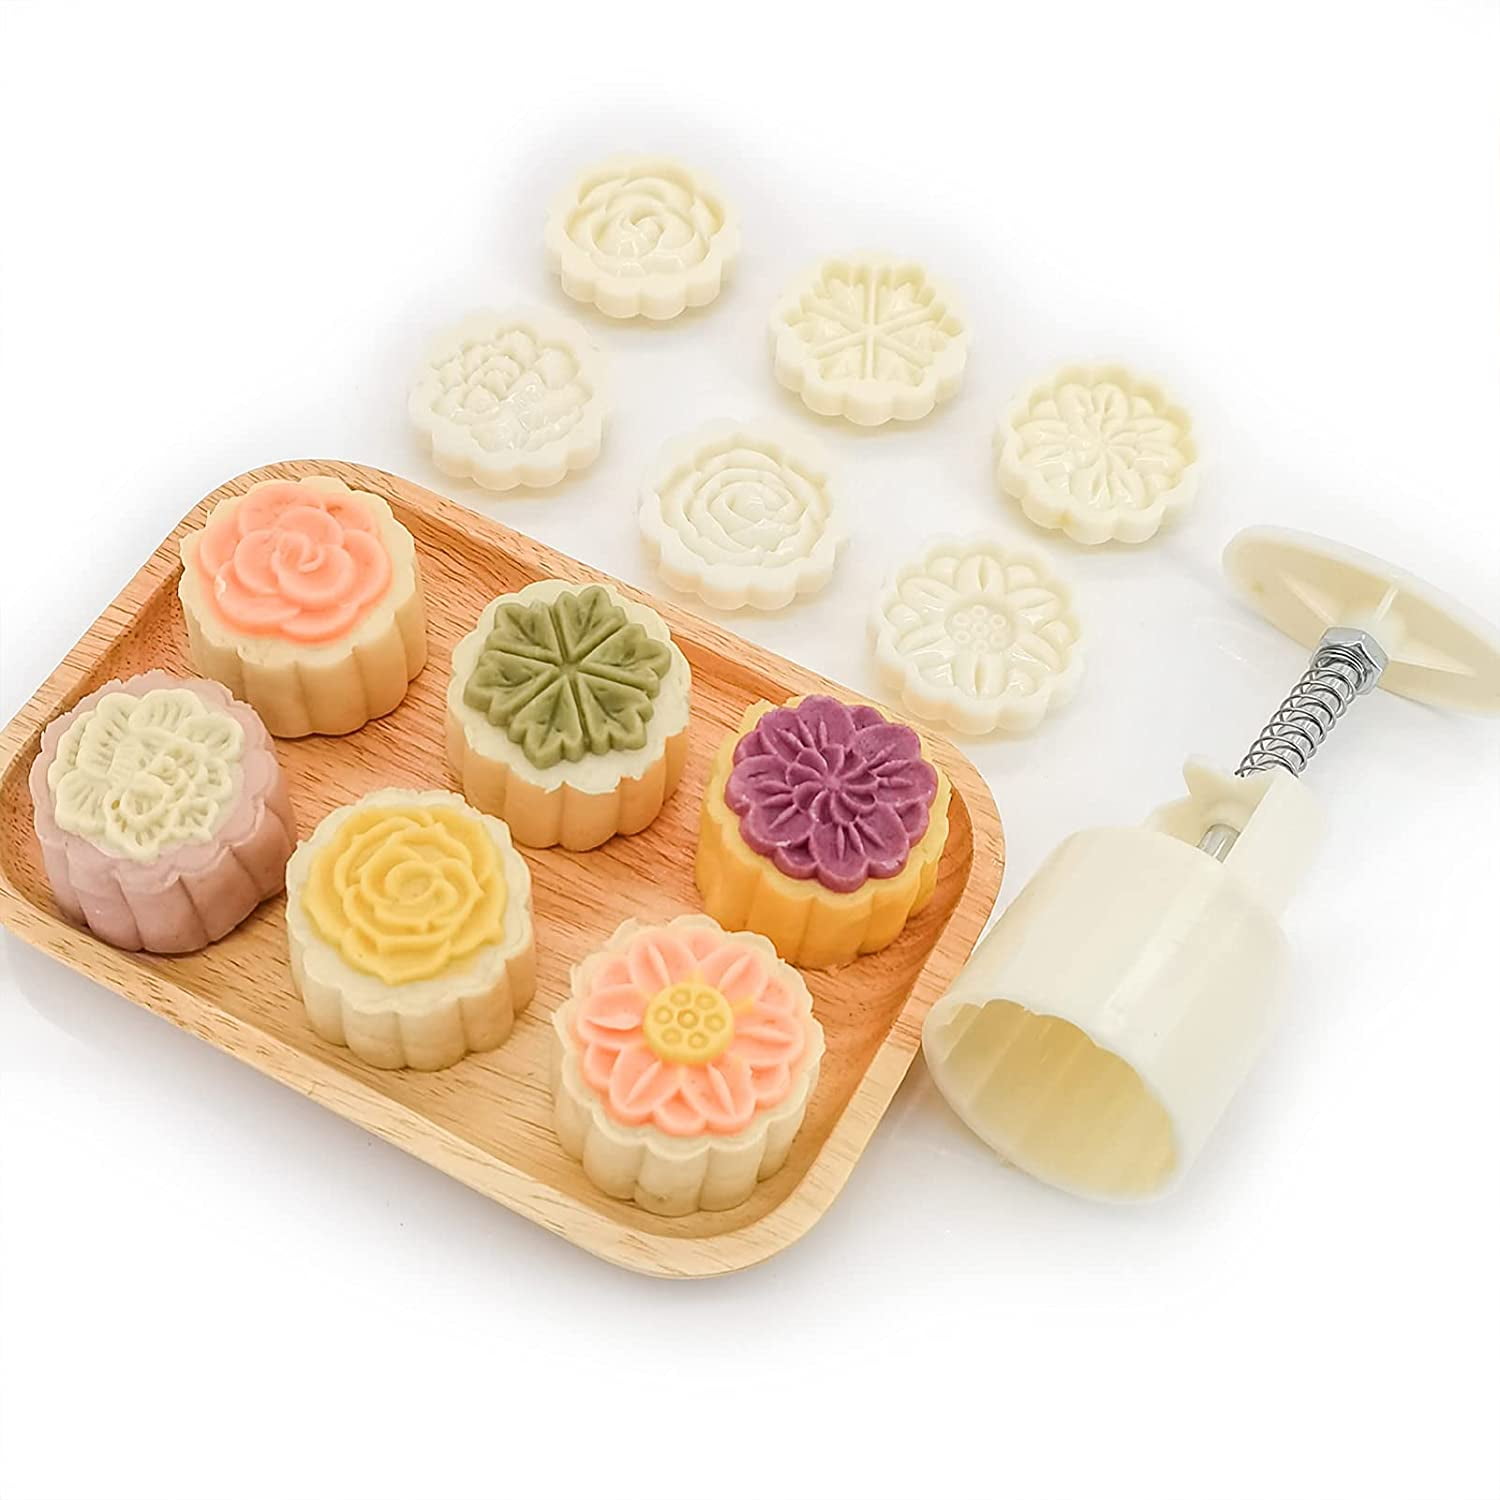 Hand Press Home Moon Cake Mold Kitchen Supplies Cake Plungers Pastry Tool